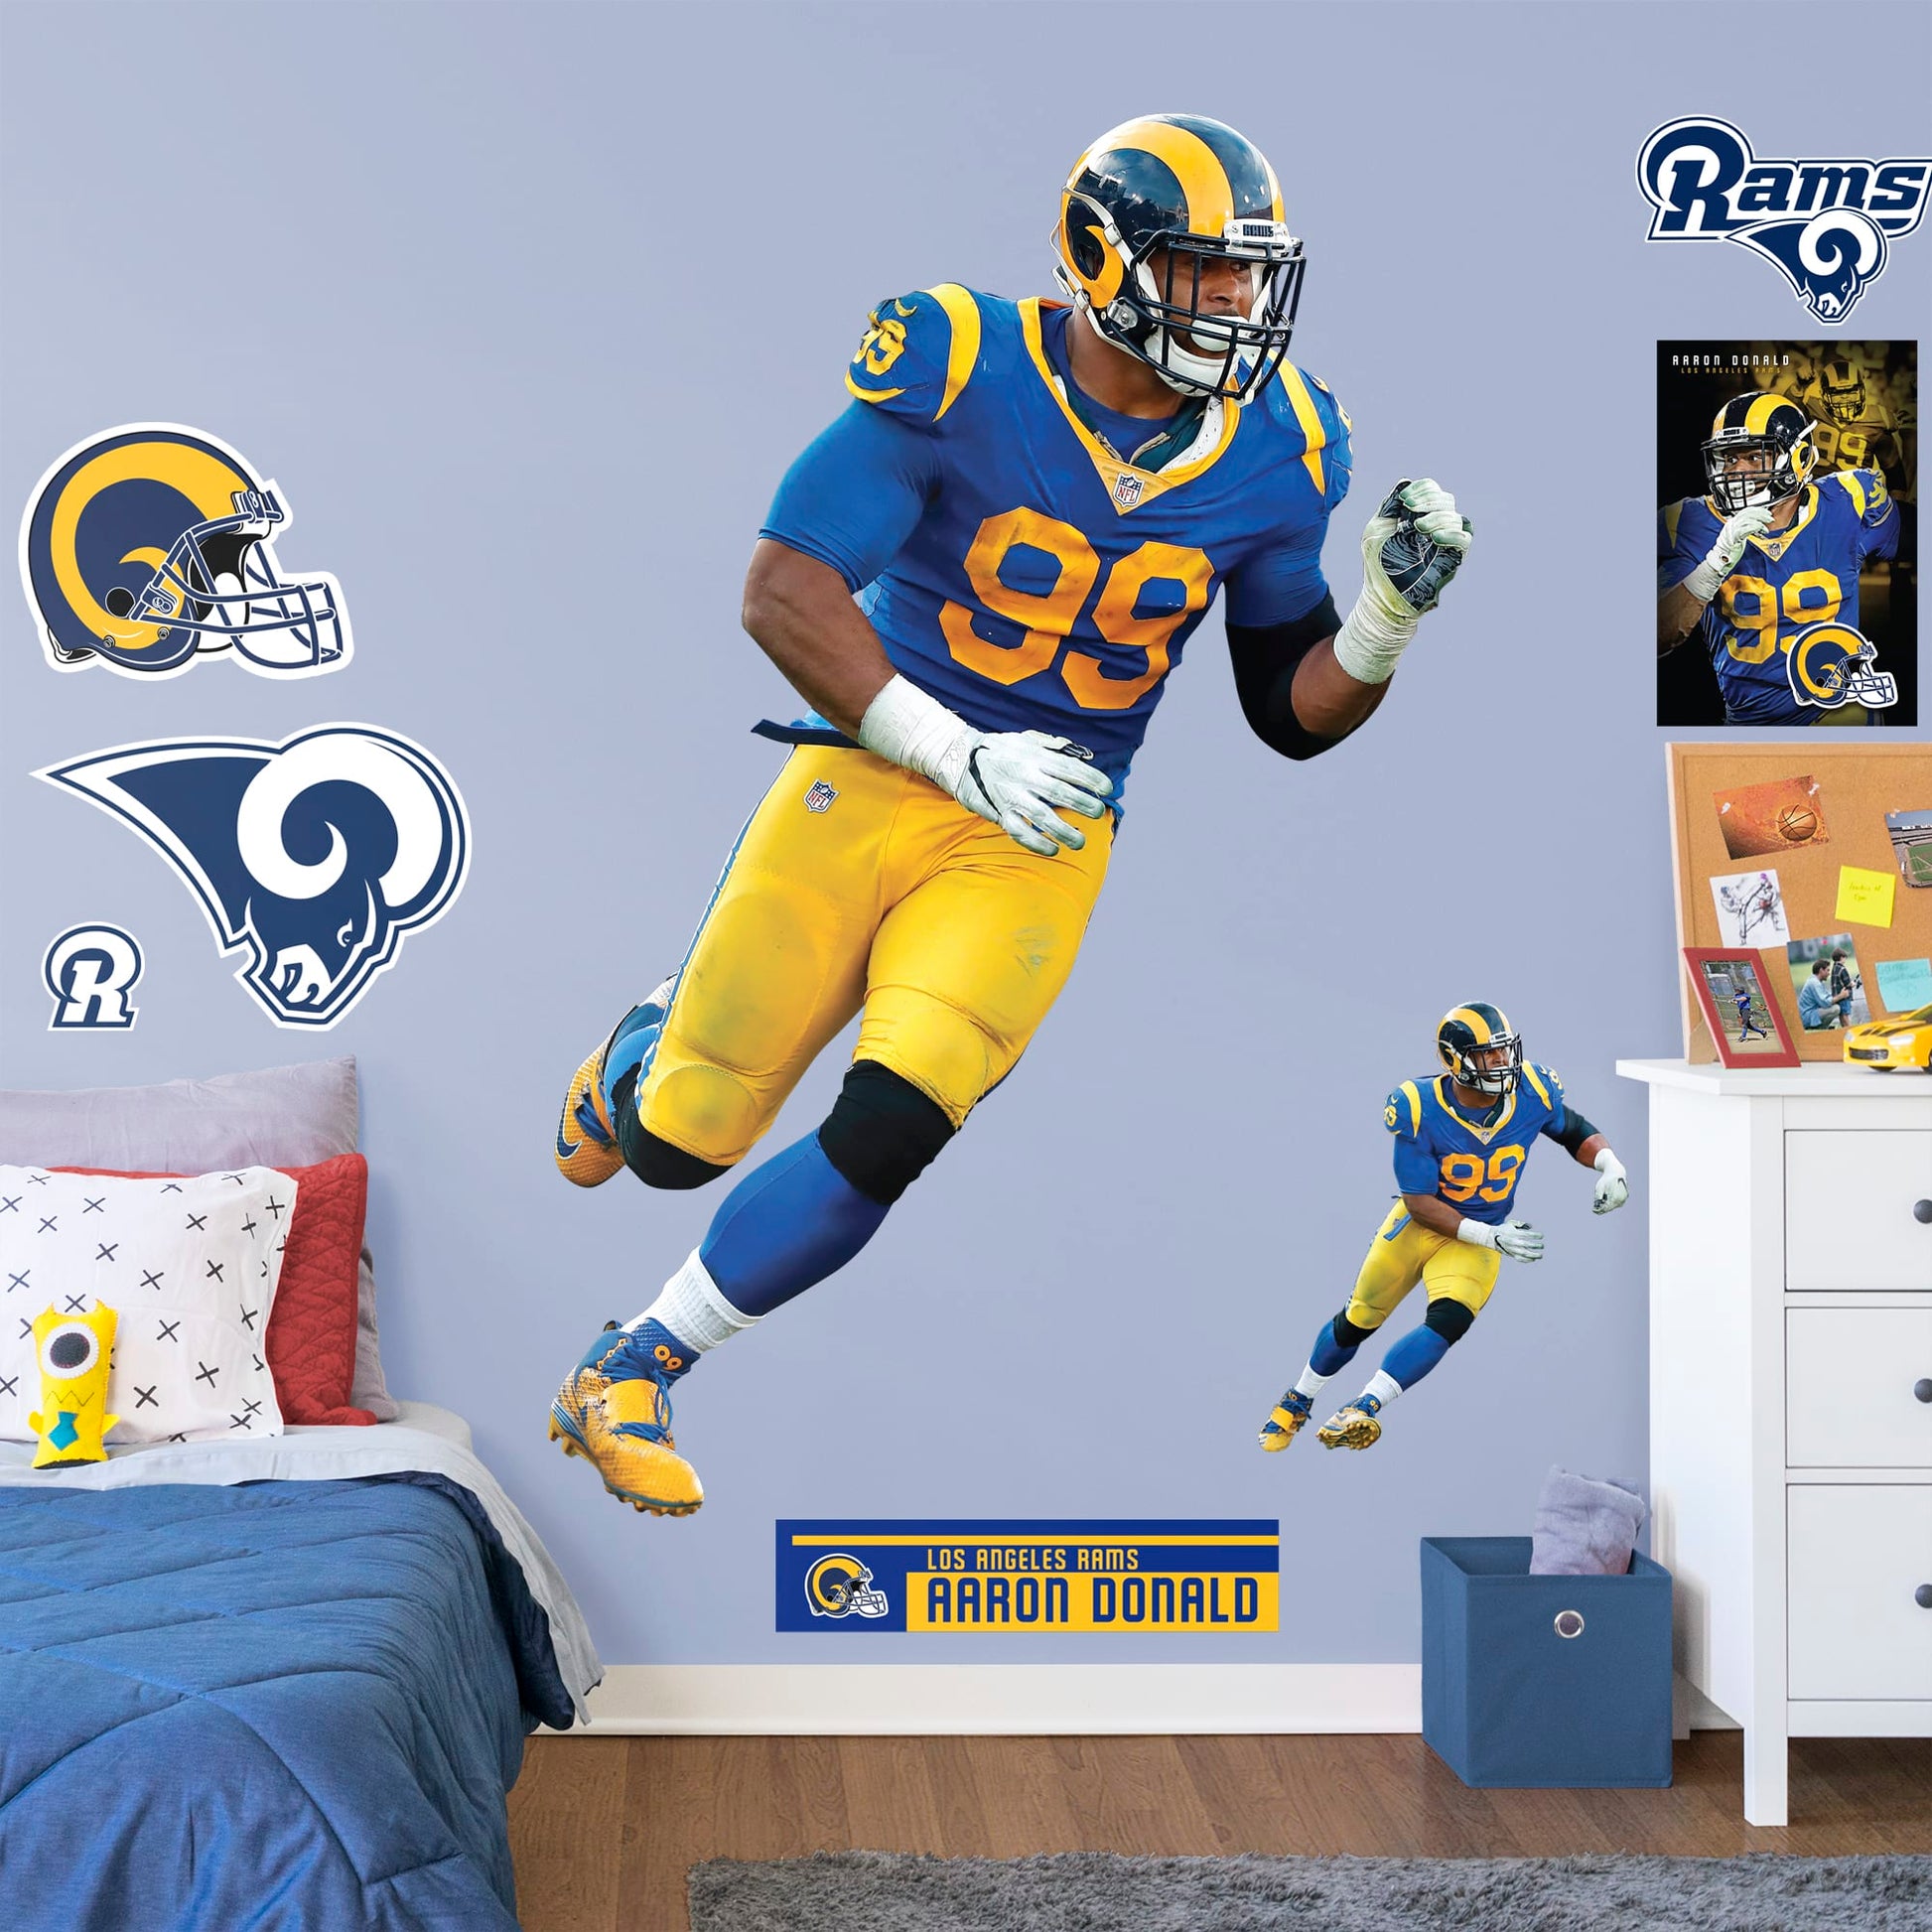 Life-Size Athlete + 8 Decals (44"W x 77"H) Ever wish you could meet Aaron Donald, one of the greatest defensive tackles in football history? Show your Los Angeles Rams team spirit with a life-size wall decal of the former Pittsburgh player once recognized as a unanimous All-American draft pick. Officially licensed by the NFL, this removable, high-quality Aaron Donald Throwback Jersey decal will show your Rams pride like no poster can.